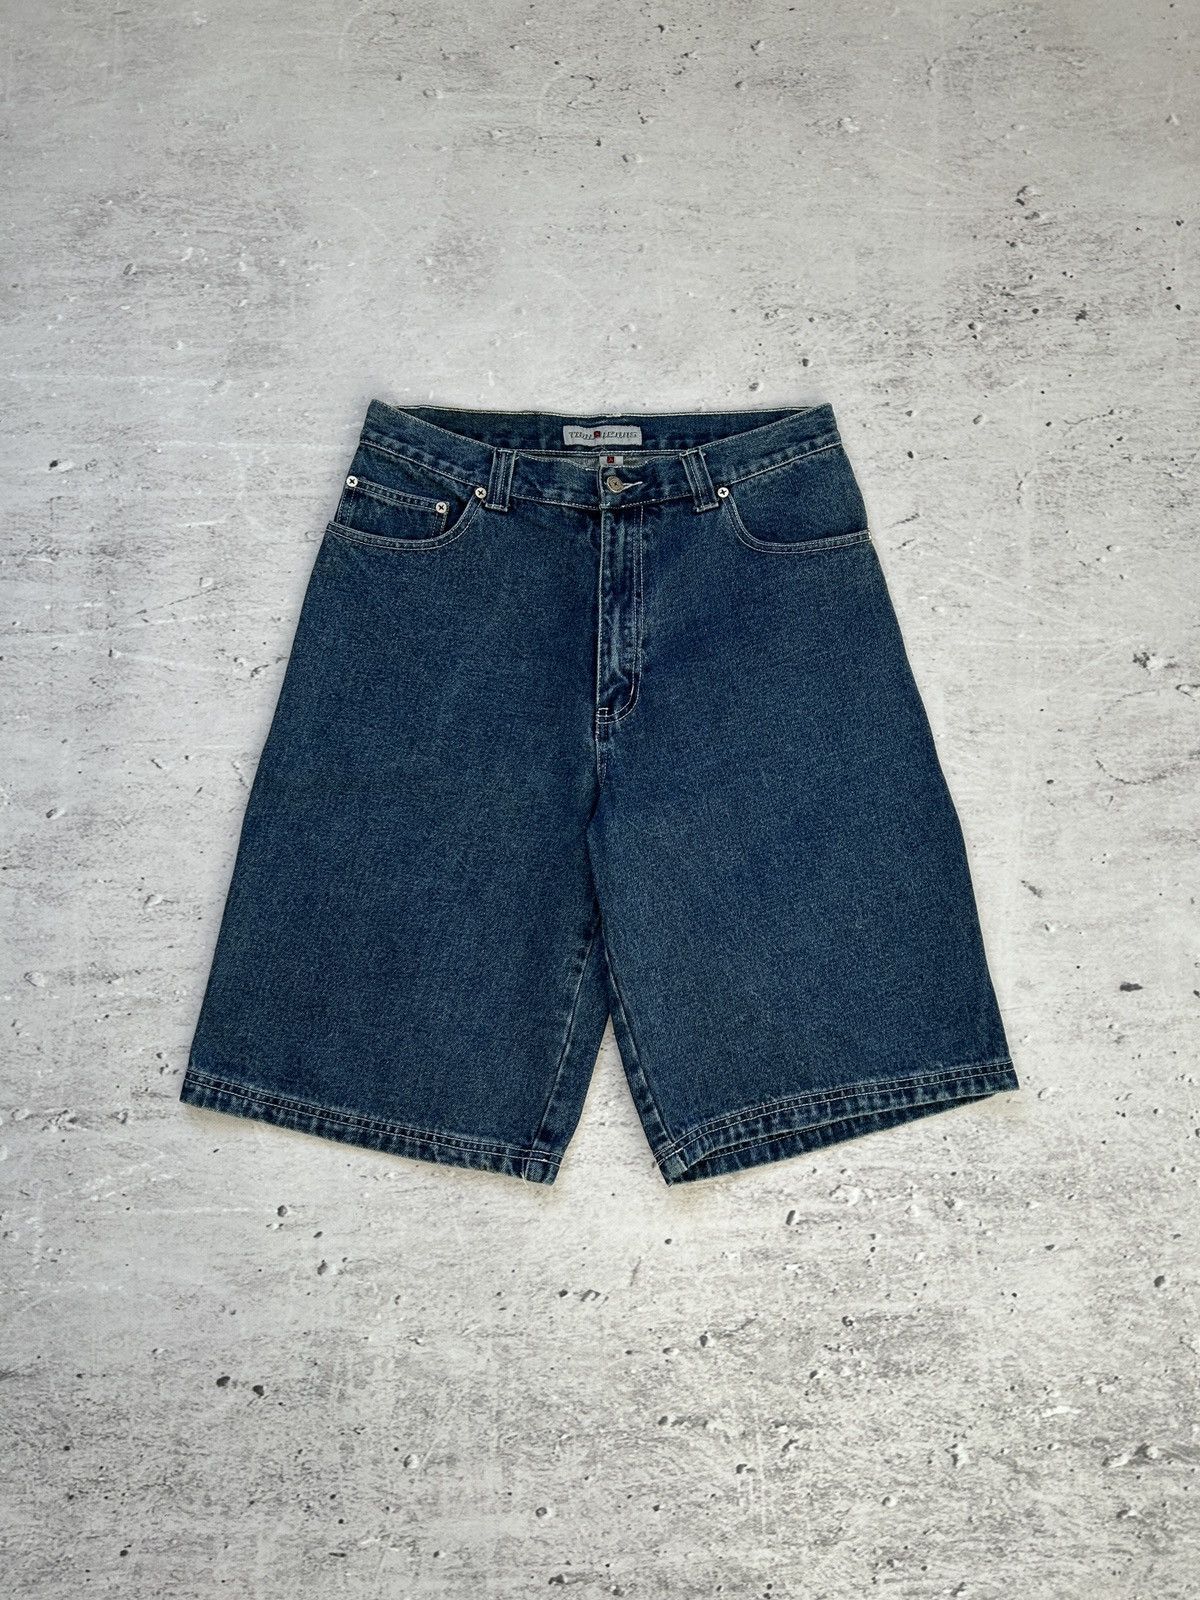 Pre-owned Jnco X Southpole Vintage Y2k Baggy Distressed Denim Carpenter Jorts 90-00s In Blue